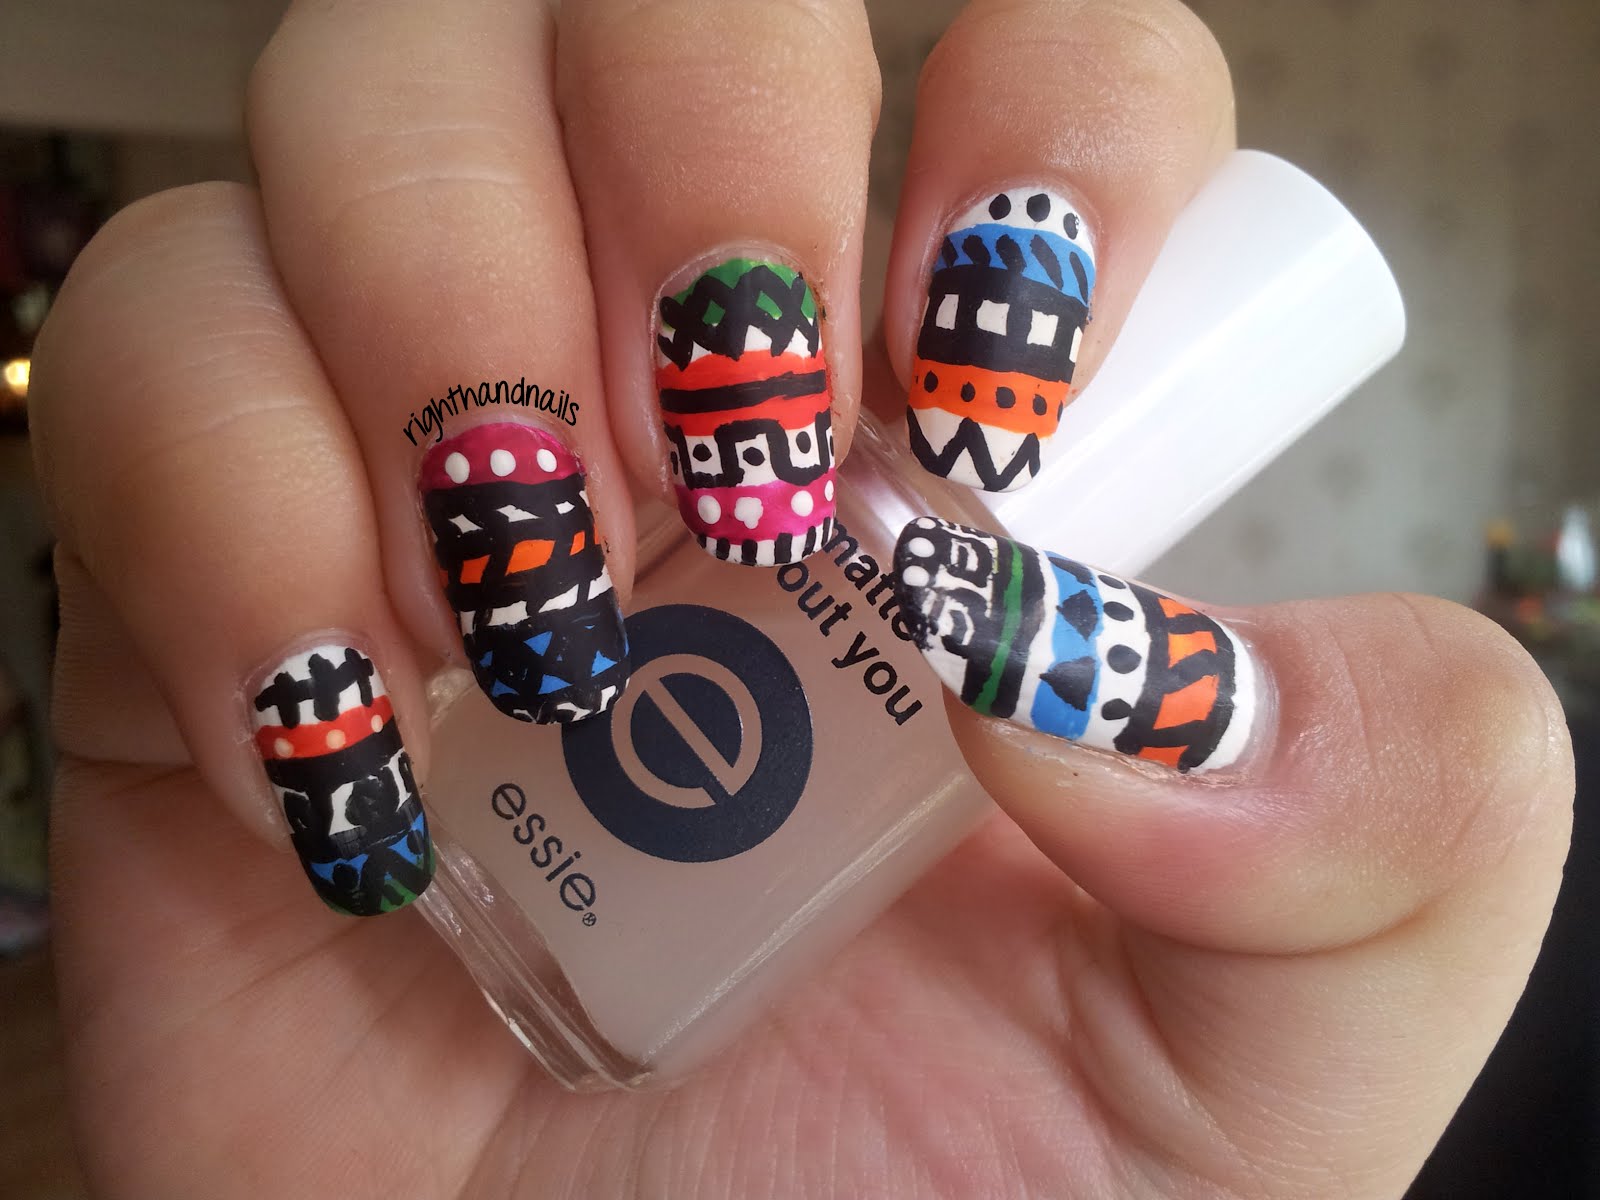 2. Tribal Nail Art Designs for Gel Nails - wide 3